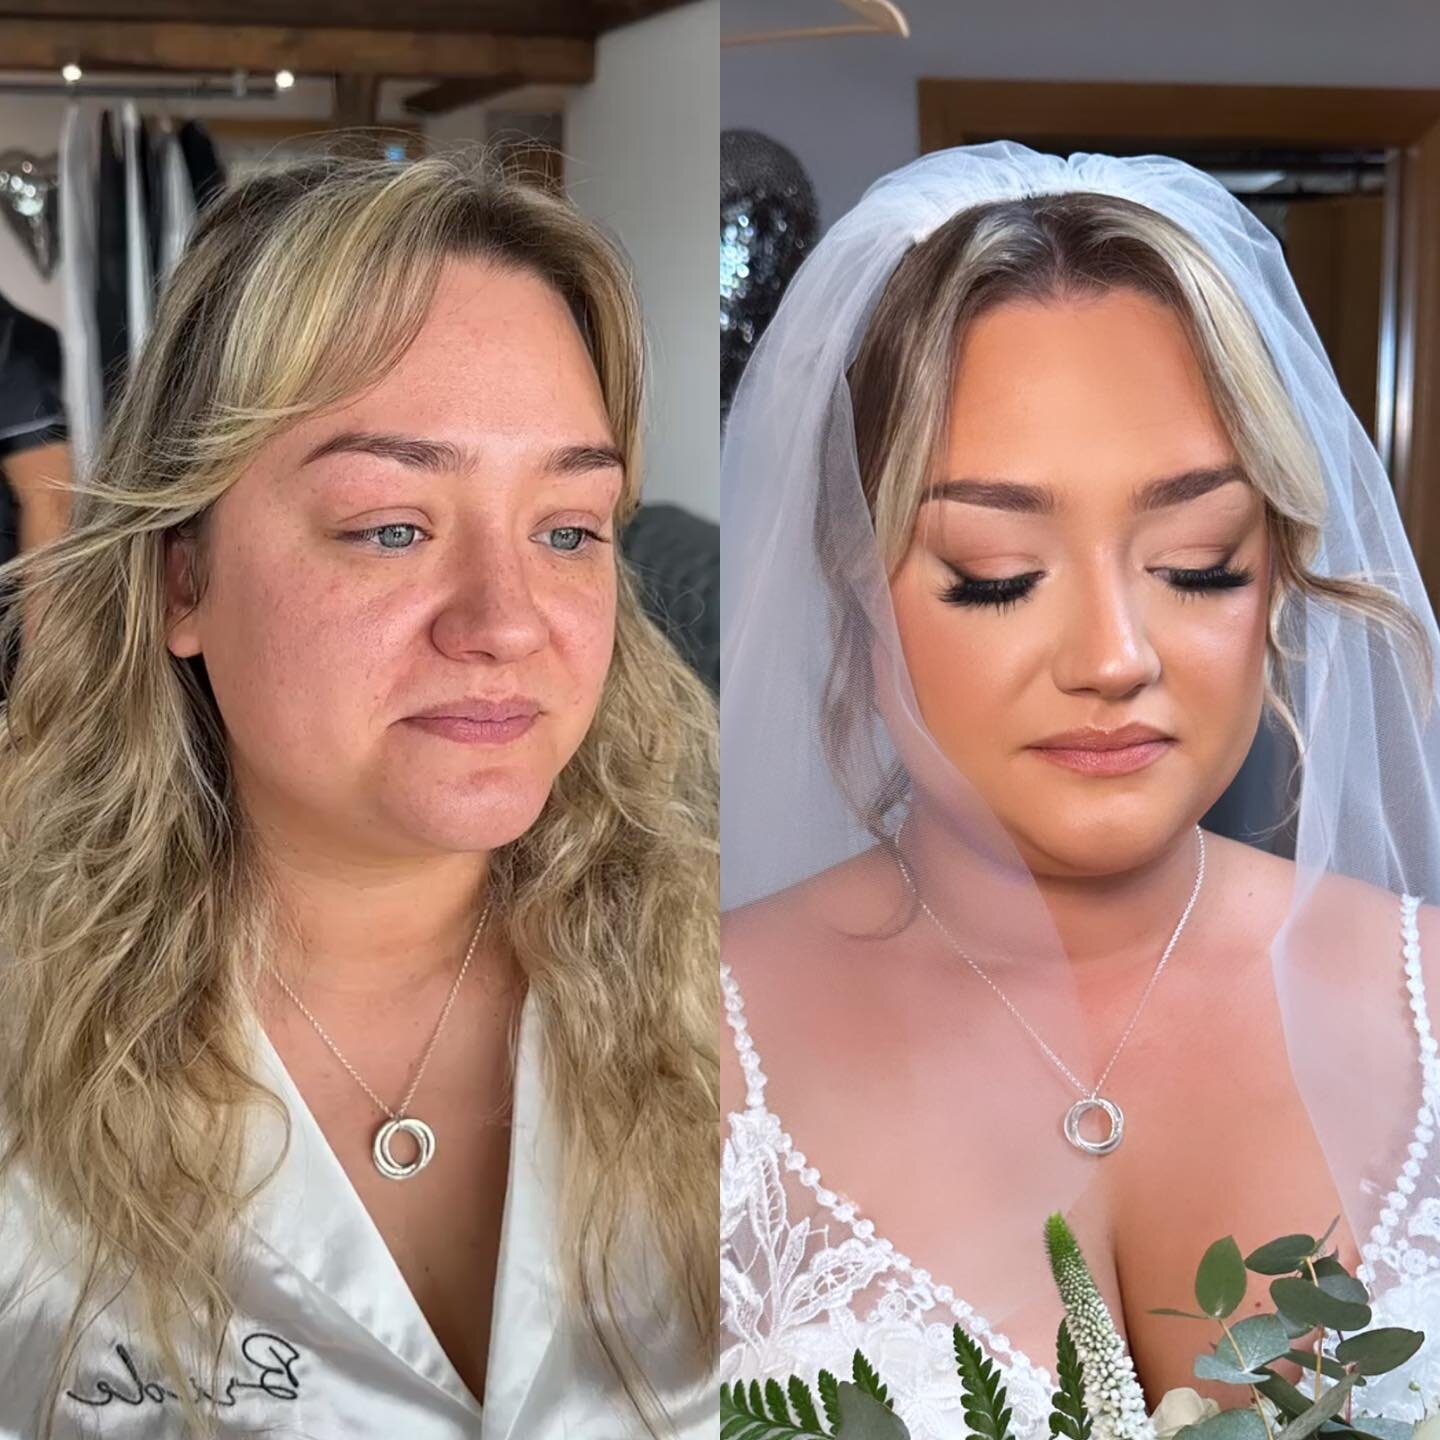 Transformation time 🤍

A moment to appreciate Leah's Yasmin Bridal transformation 💖

Leah asked for full coverage glam while still keeping it bridal and I really love the look we came up with 🤍

💒@heatonhousefarm

💄Using - @charlottetilbury @nar